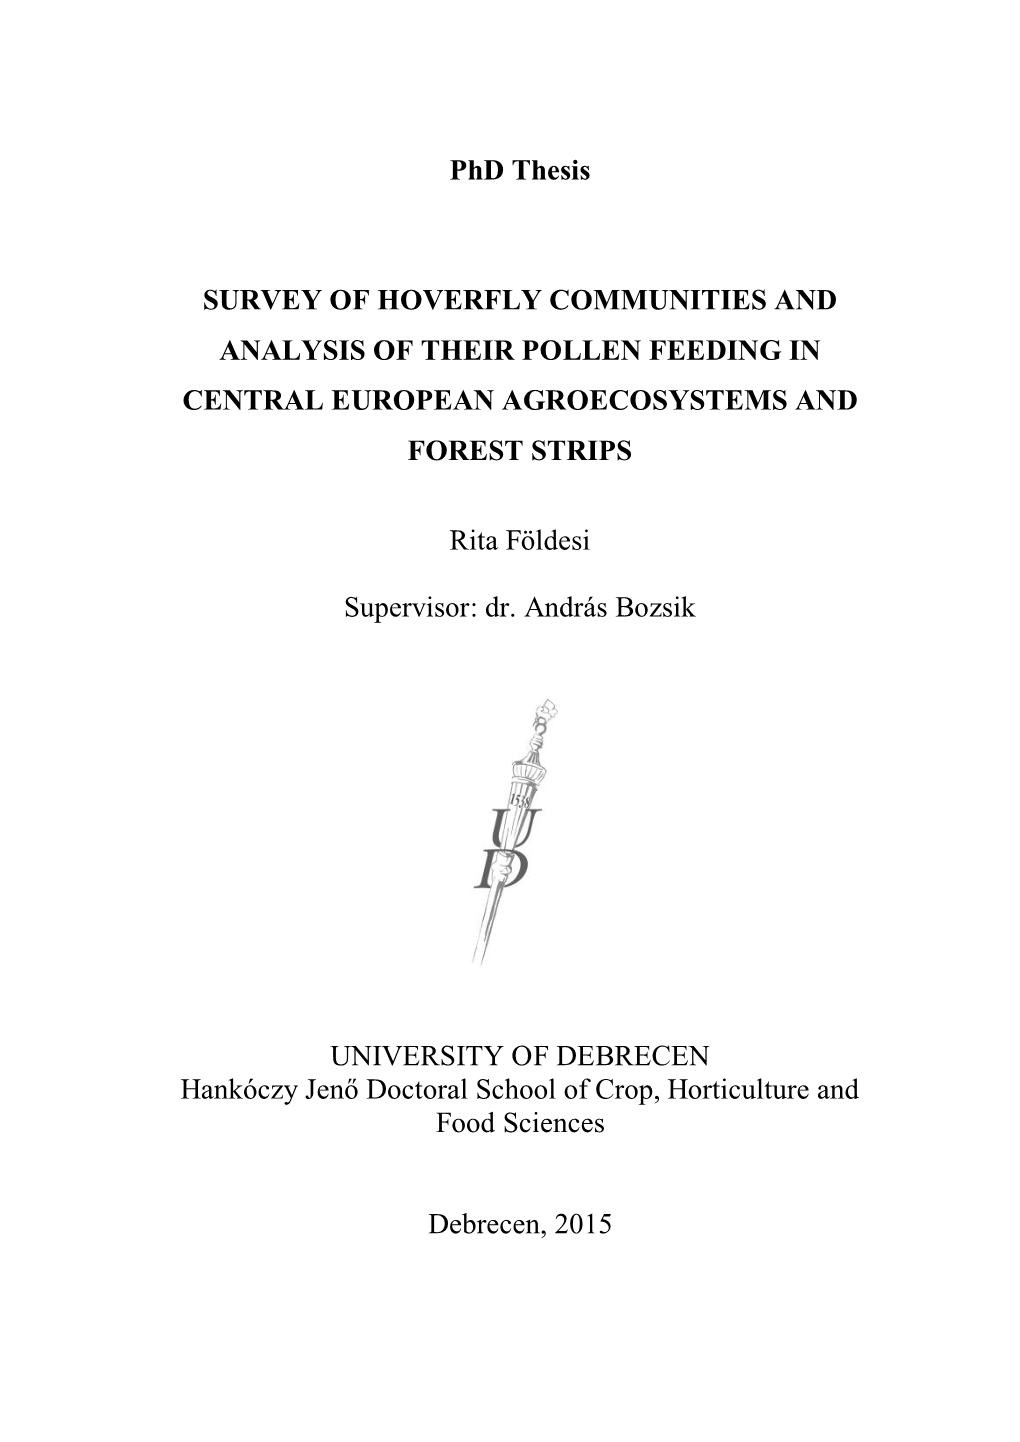 1 Phd Thesis SURVEY of HOVERFLY COMMUNITIES AND